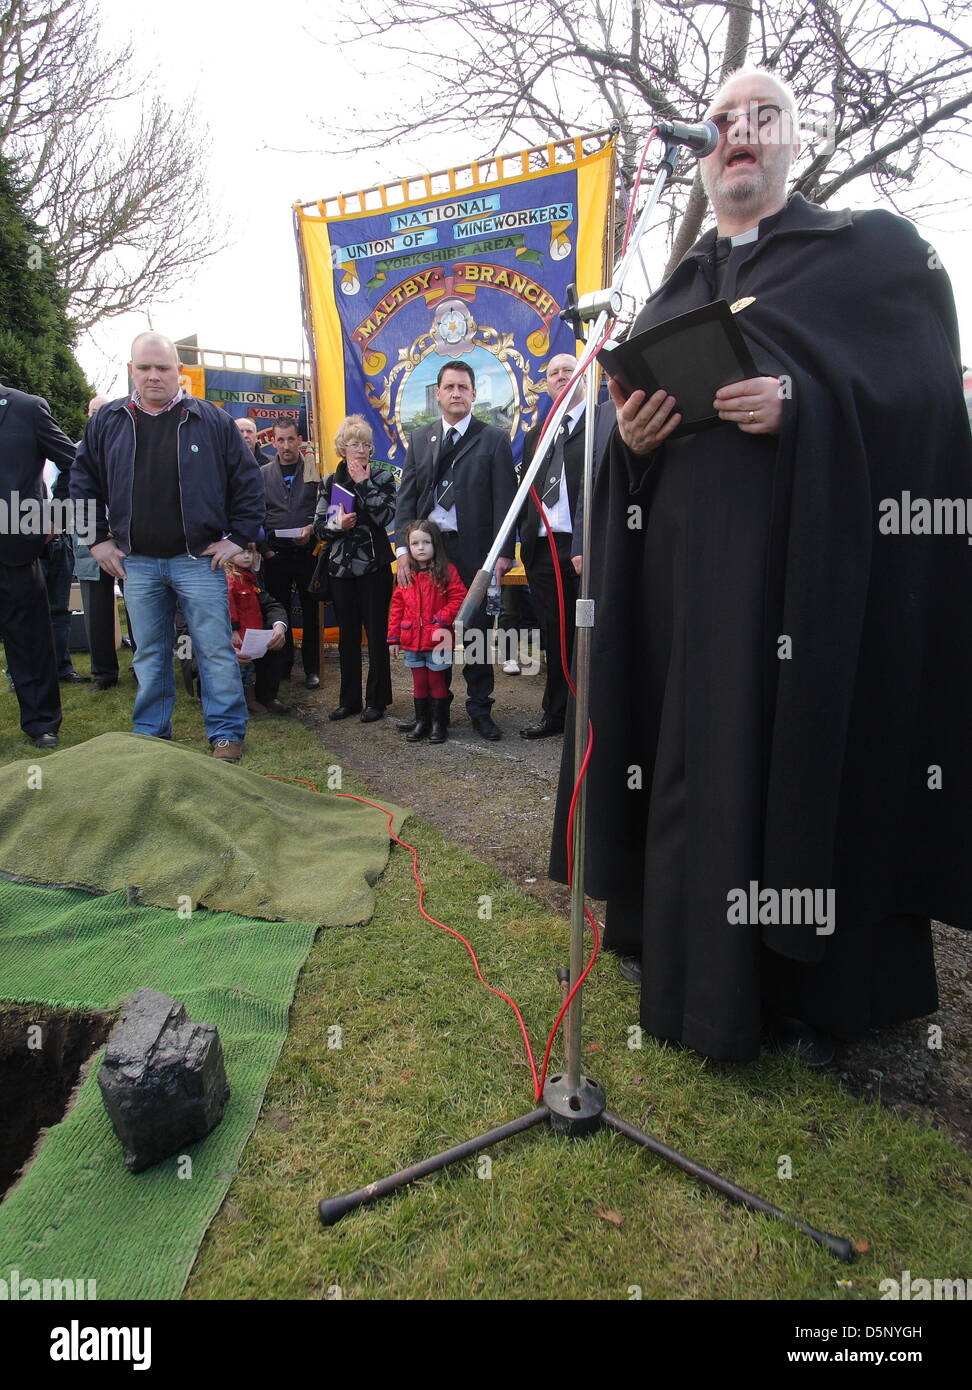 Maltby, UK. 6th April 2013. Reverand Peter Craig-Wild leads a service at Maltby Cemetery to mark the closure of Maltby Colliery.  A piece of coal, dug recently from the pit, was buried alongside the Grave of the Unknown Miner on which two wreaths were laid. Credit: Matthew Taylor / Alamy Live News Stock Photo